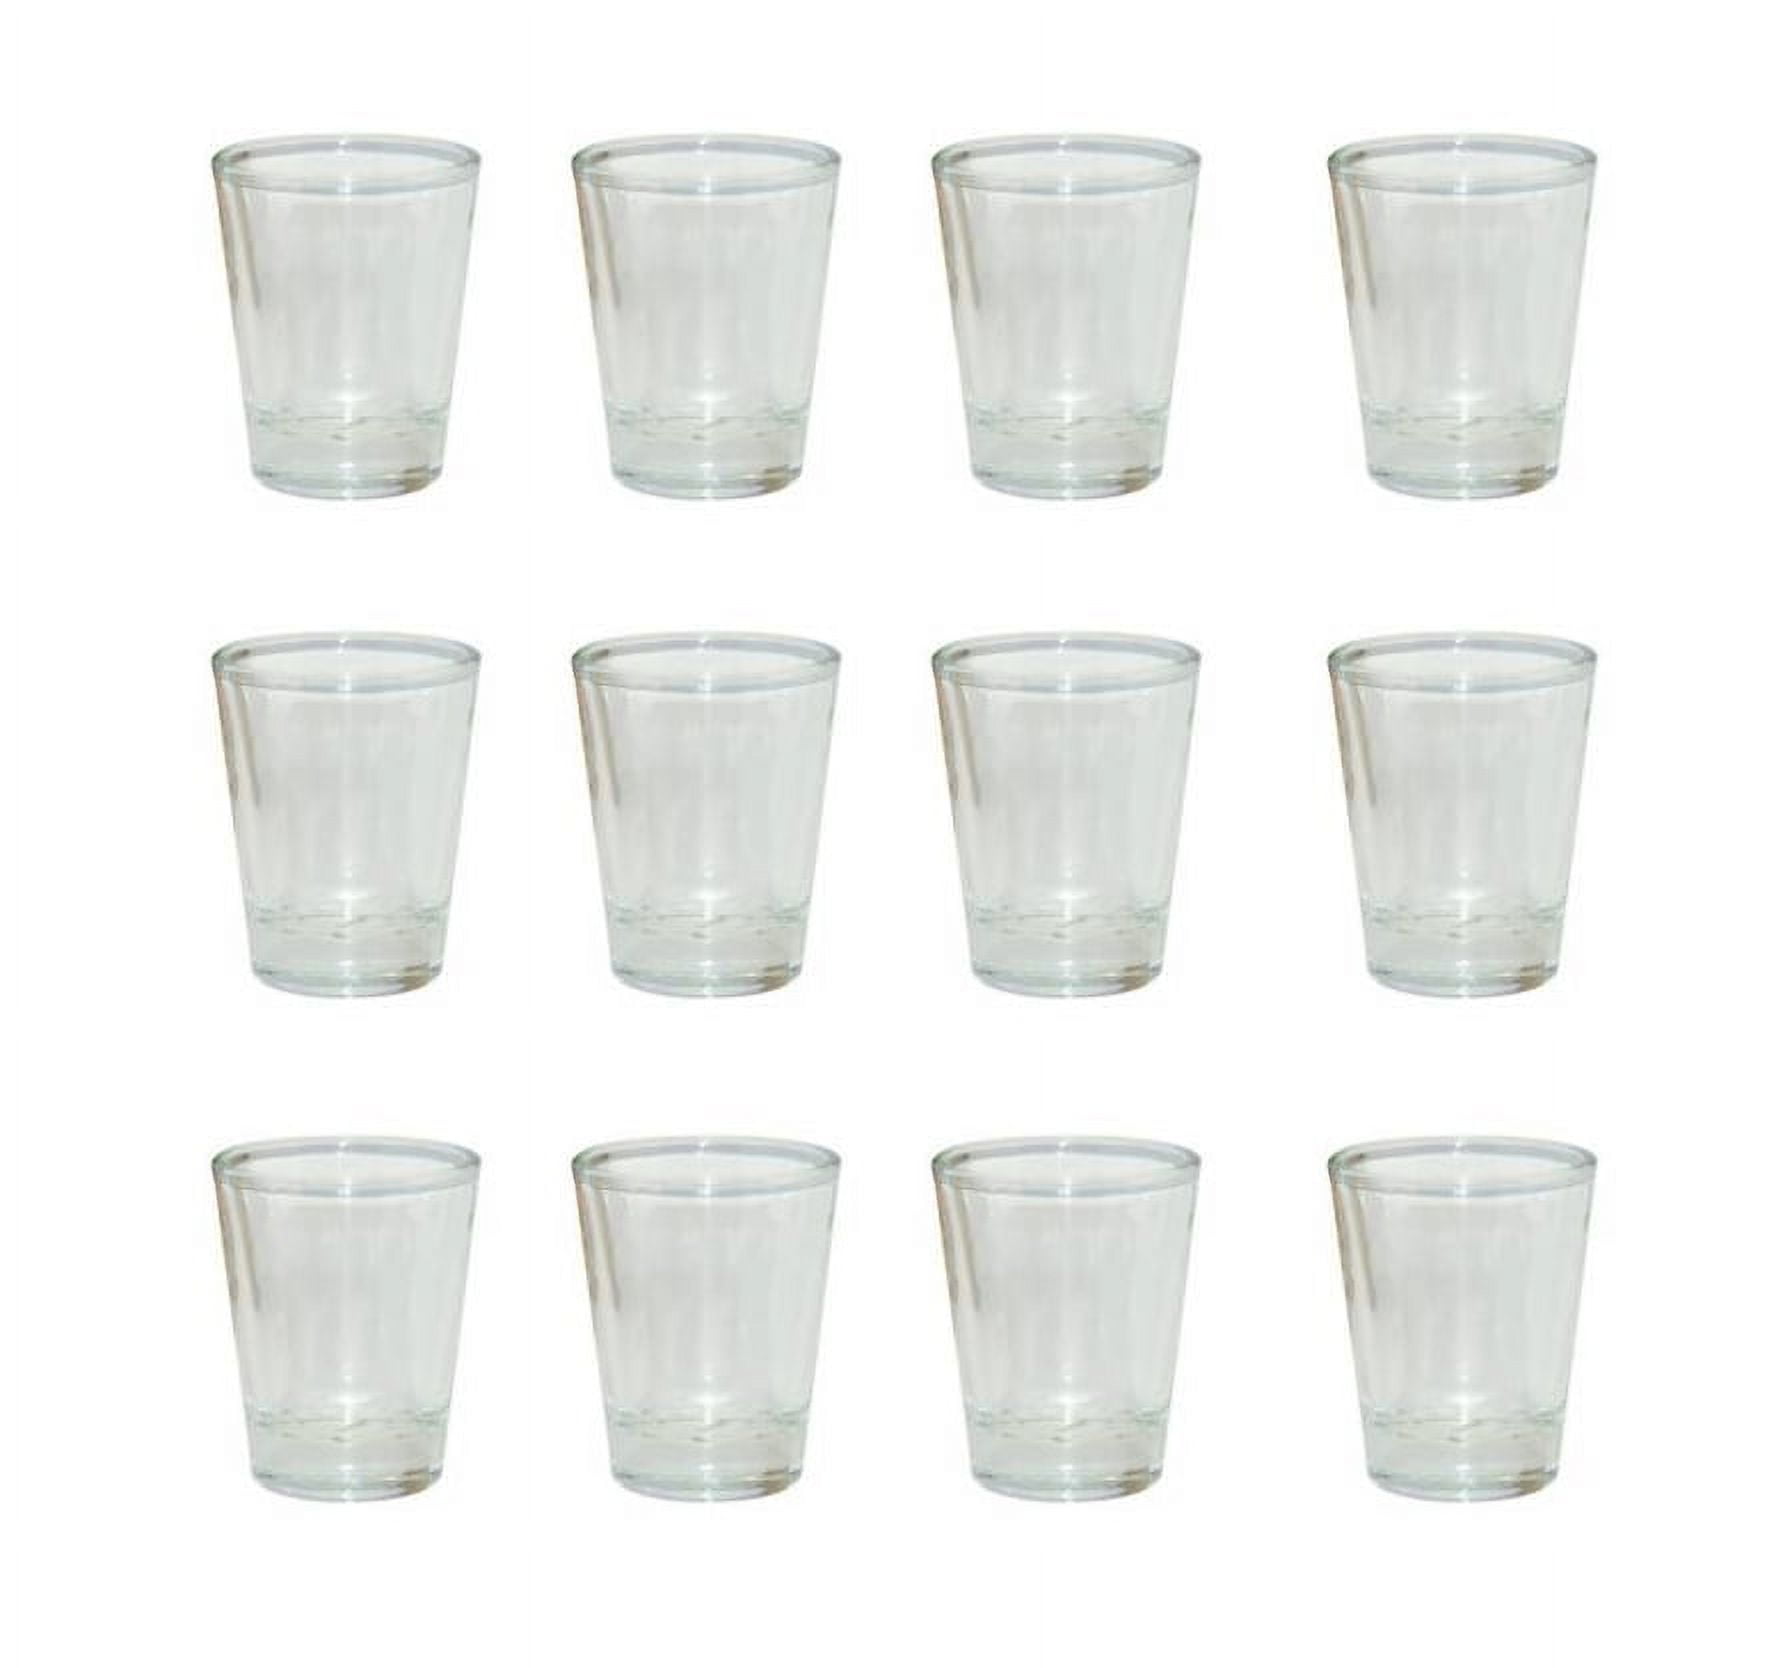 12 Pieces 1.5oz Sublimation Blank Long Shot Glass Bar drink alcohol Tequila  Brandy with Golden Rim (4'' x 2'')